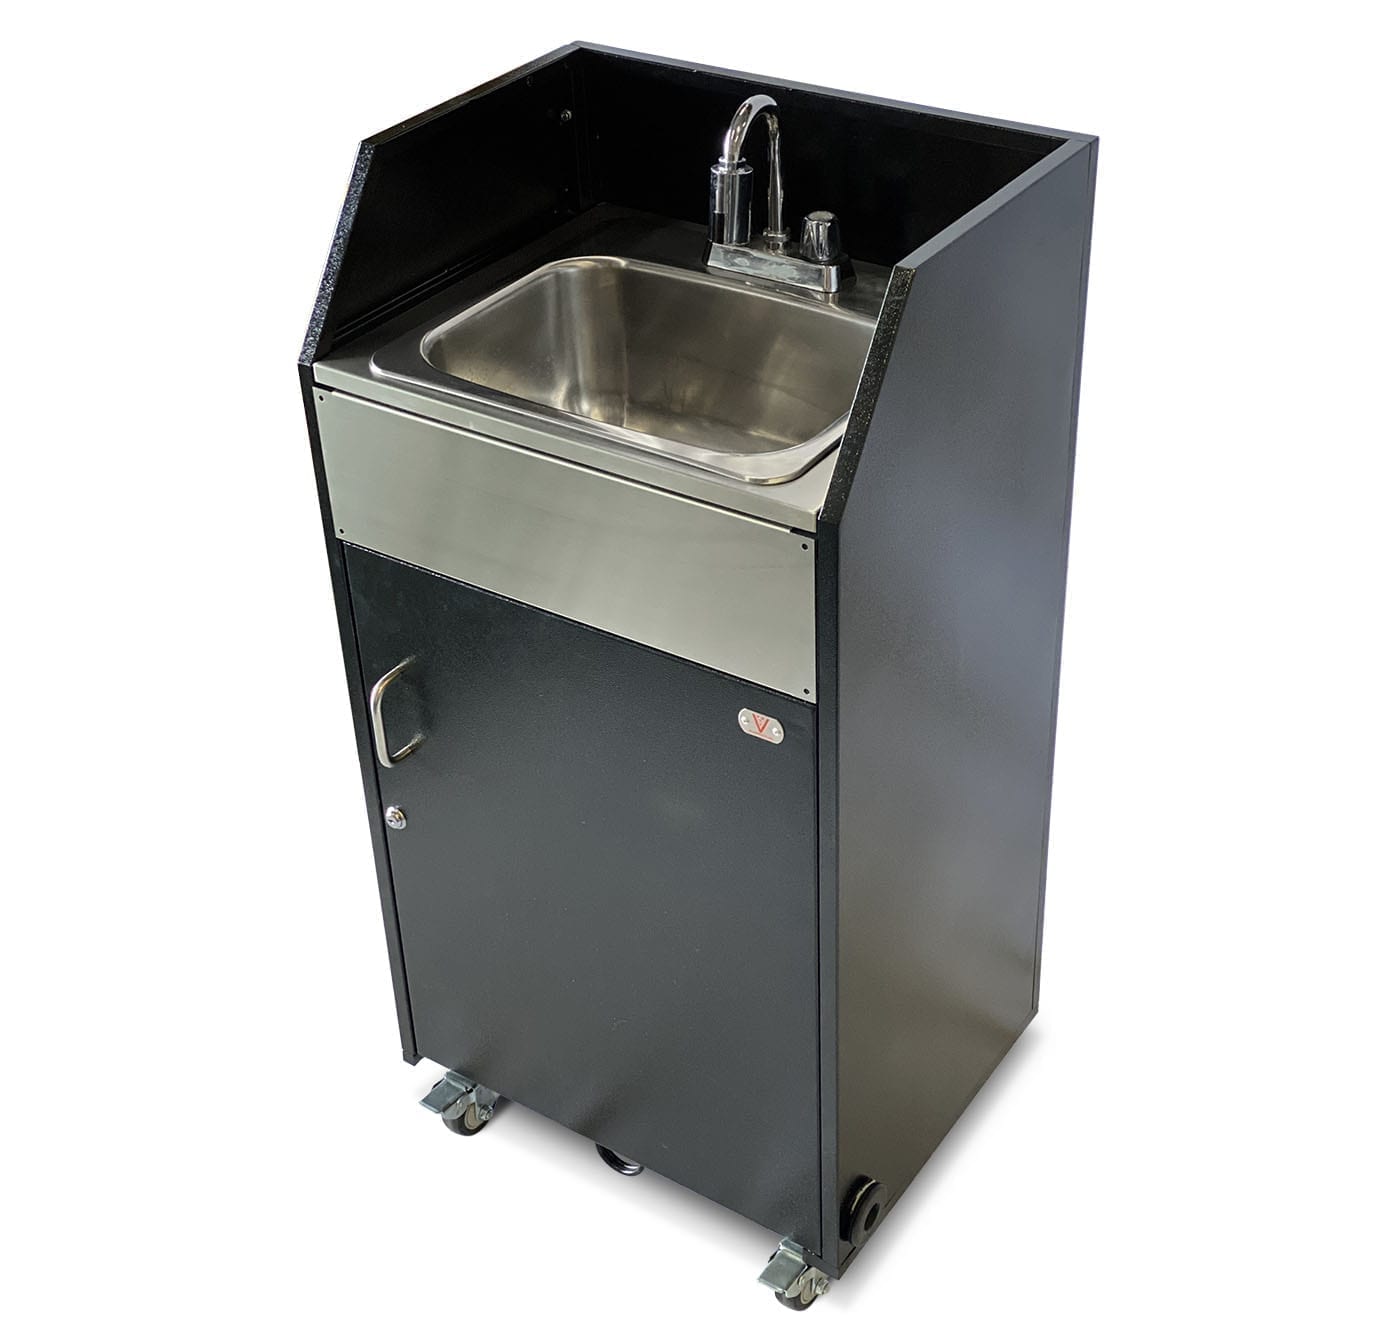 Portable Hand Wash Sink The Valet Spot